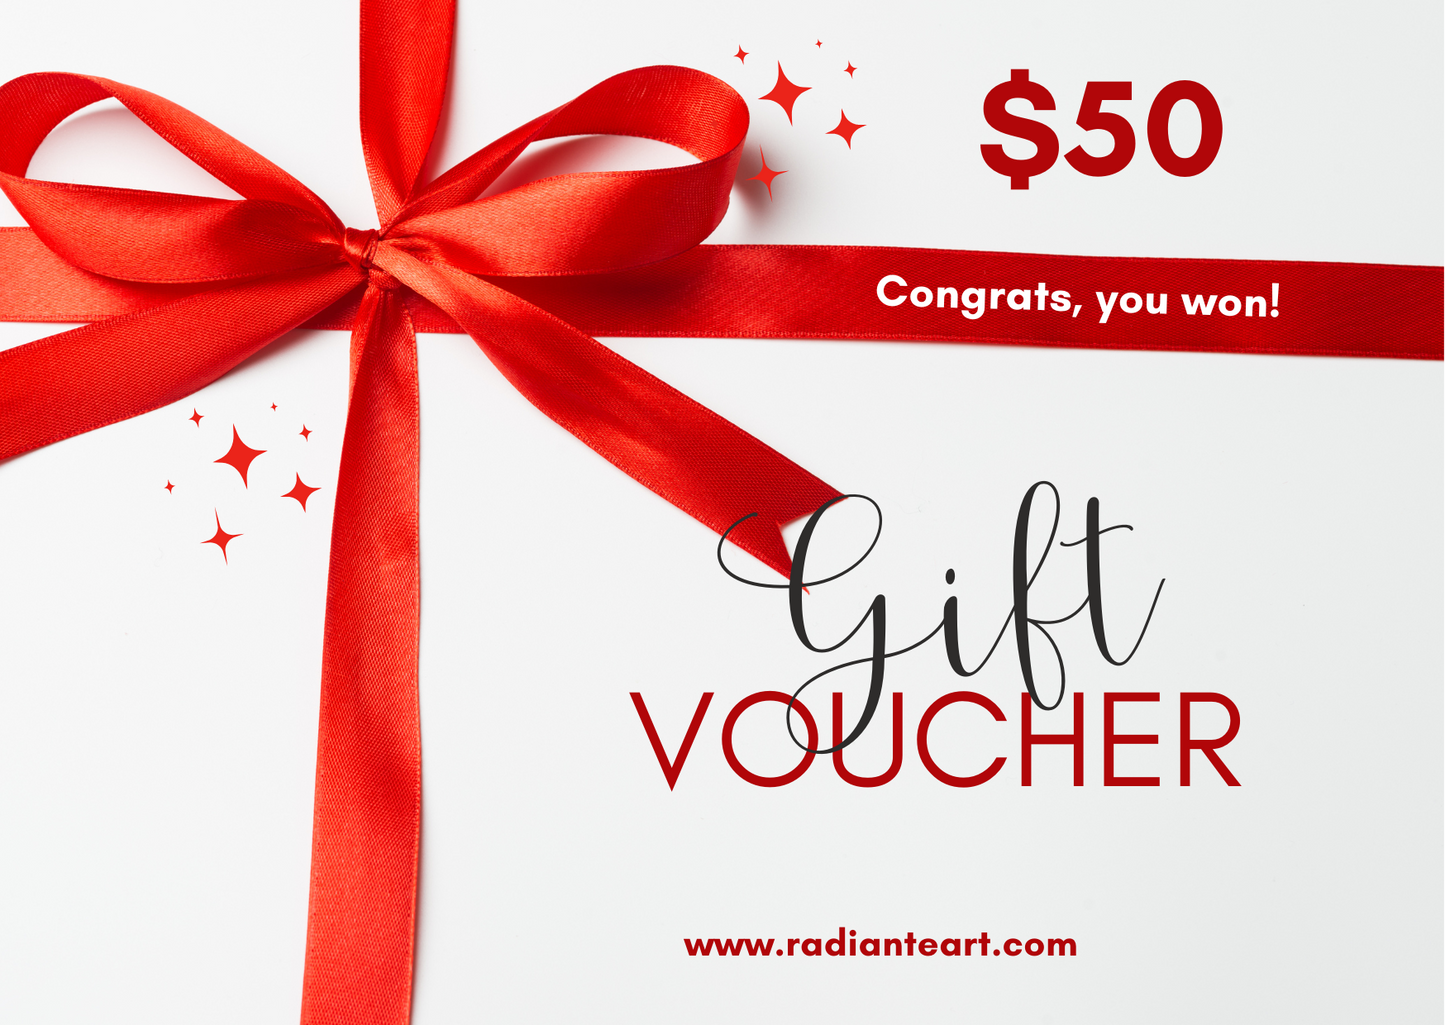 YOU RECEIVED THIS GIFT CARD FROM RADIANTE ART FOR US$ 50